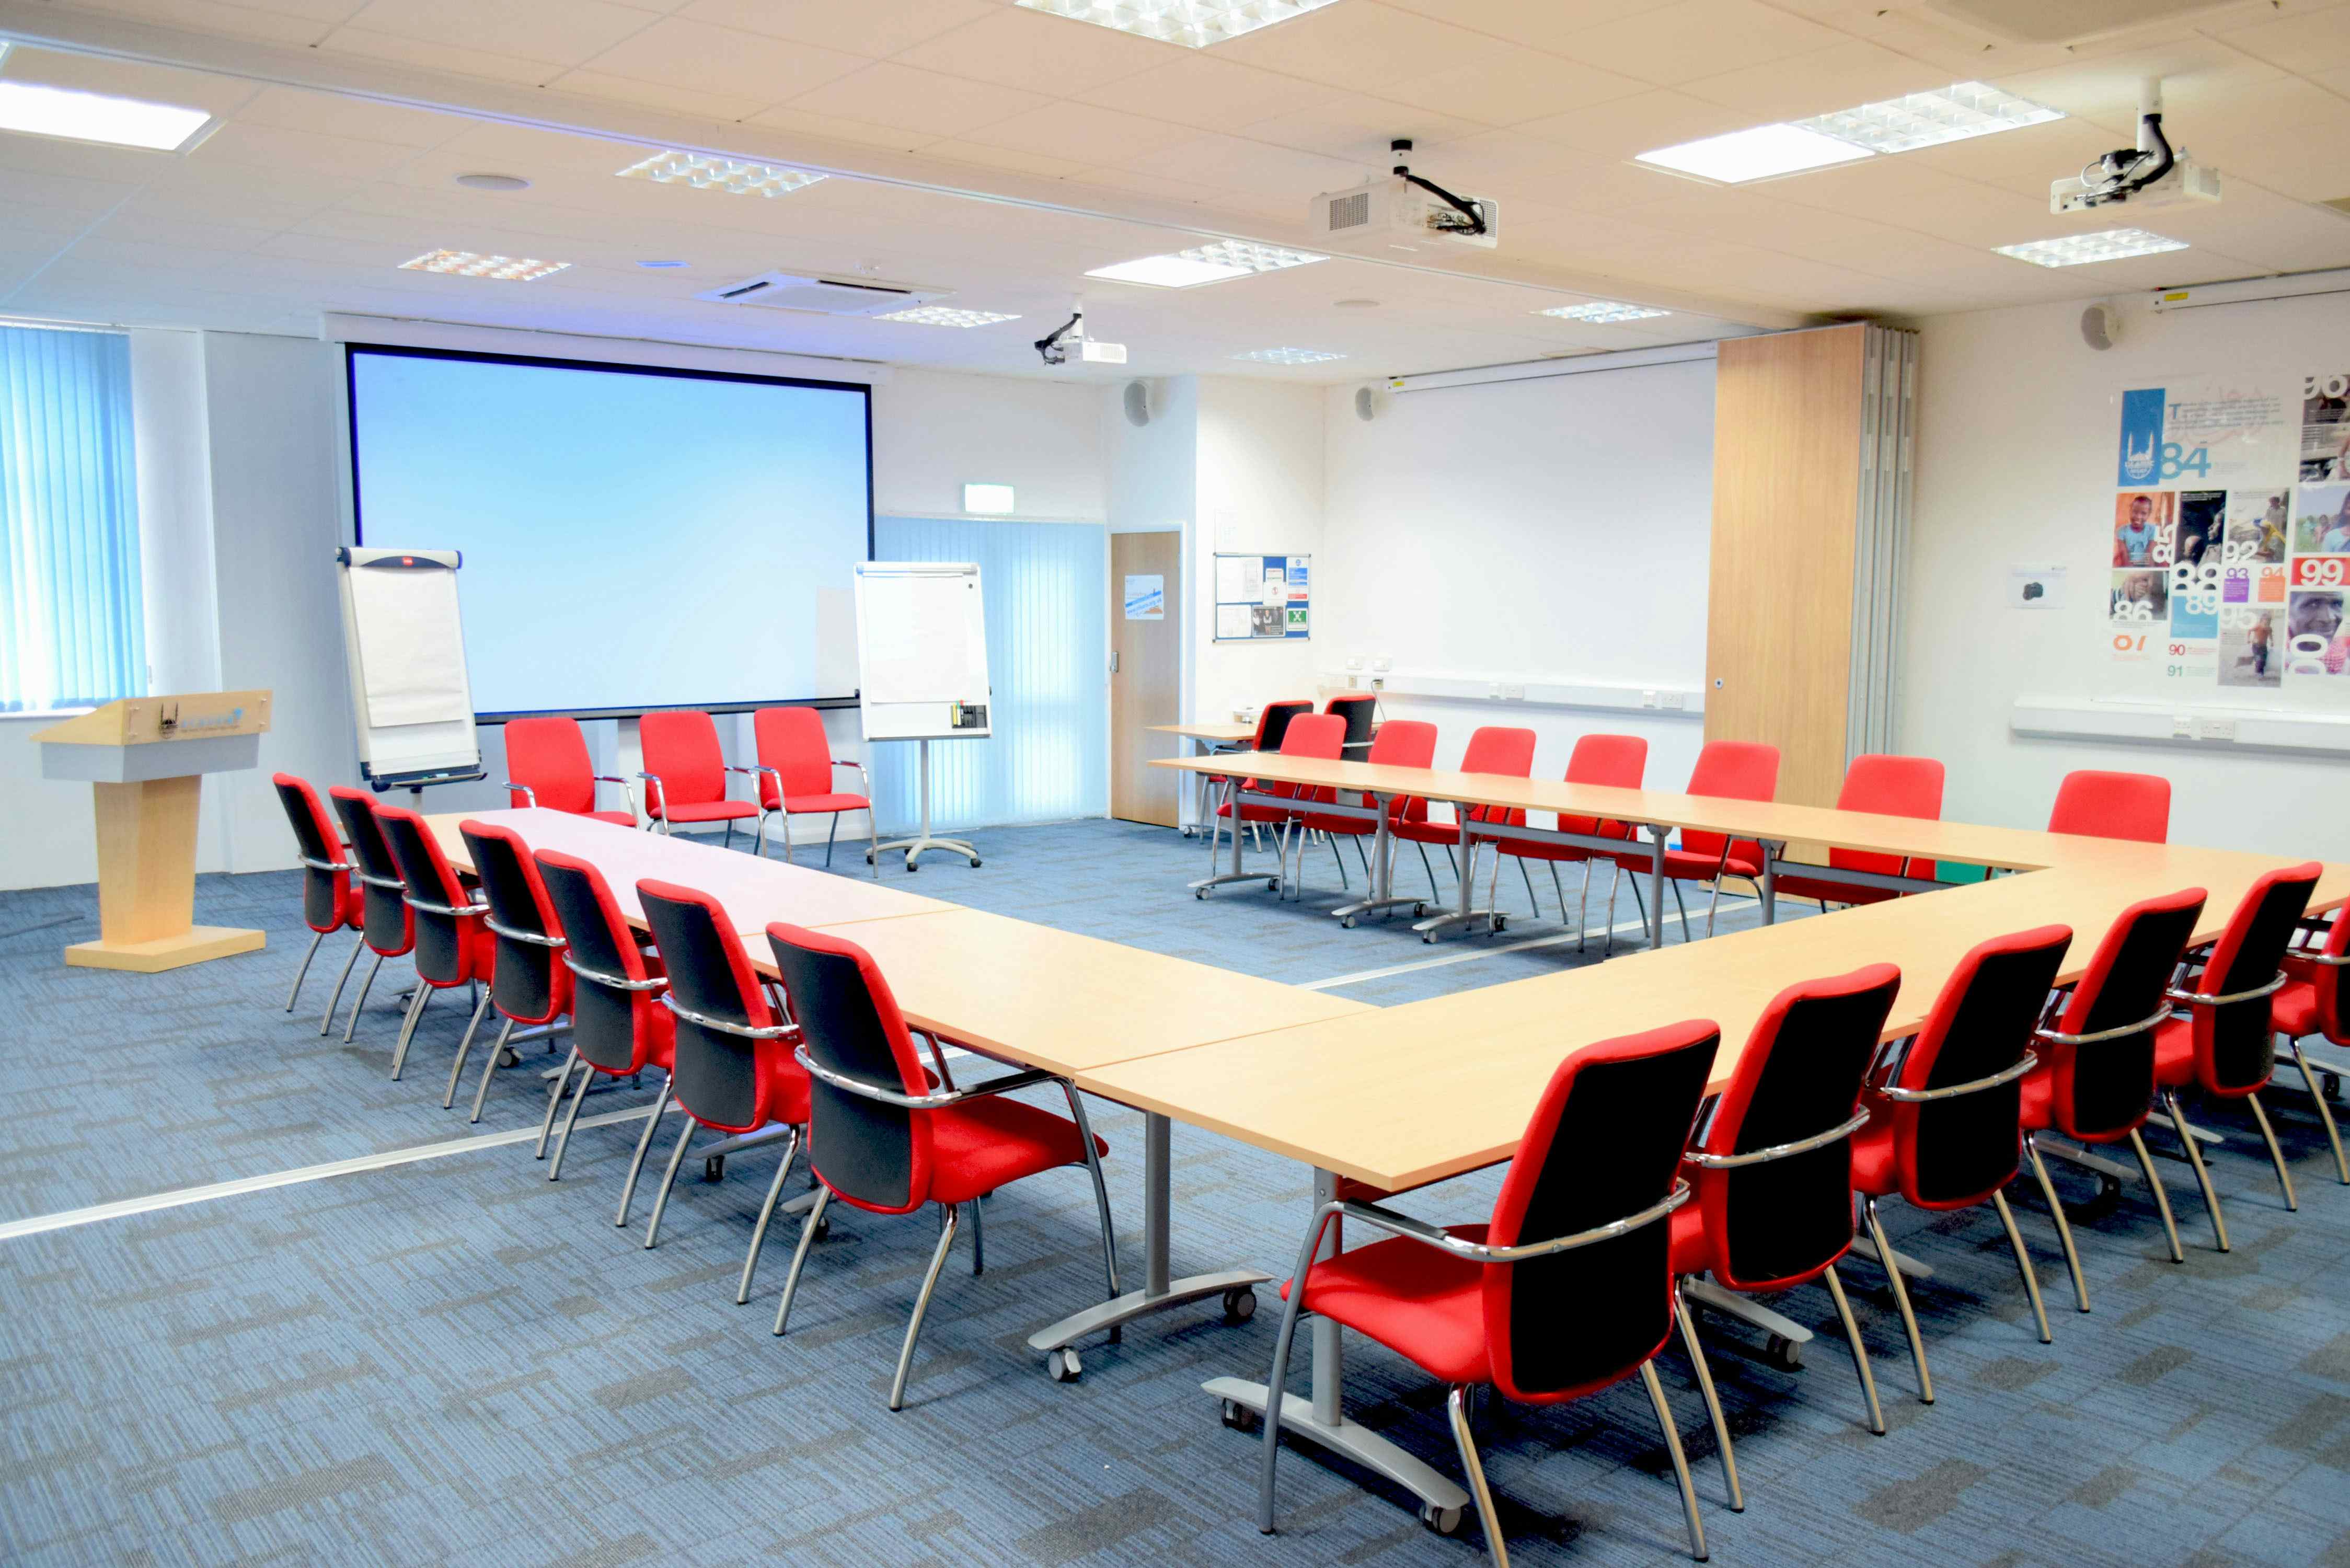 Conference Room, Humanitarian Academy for Development